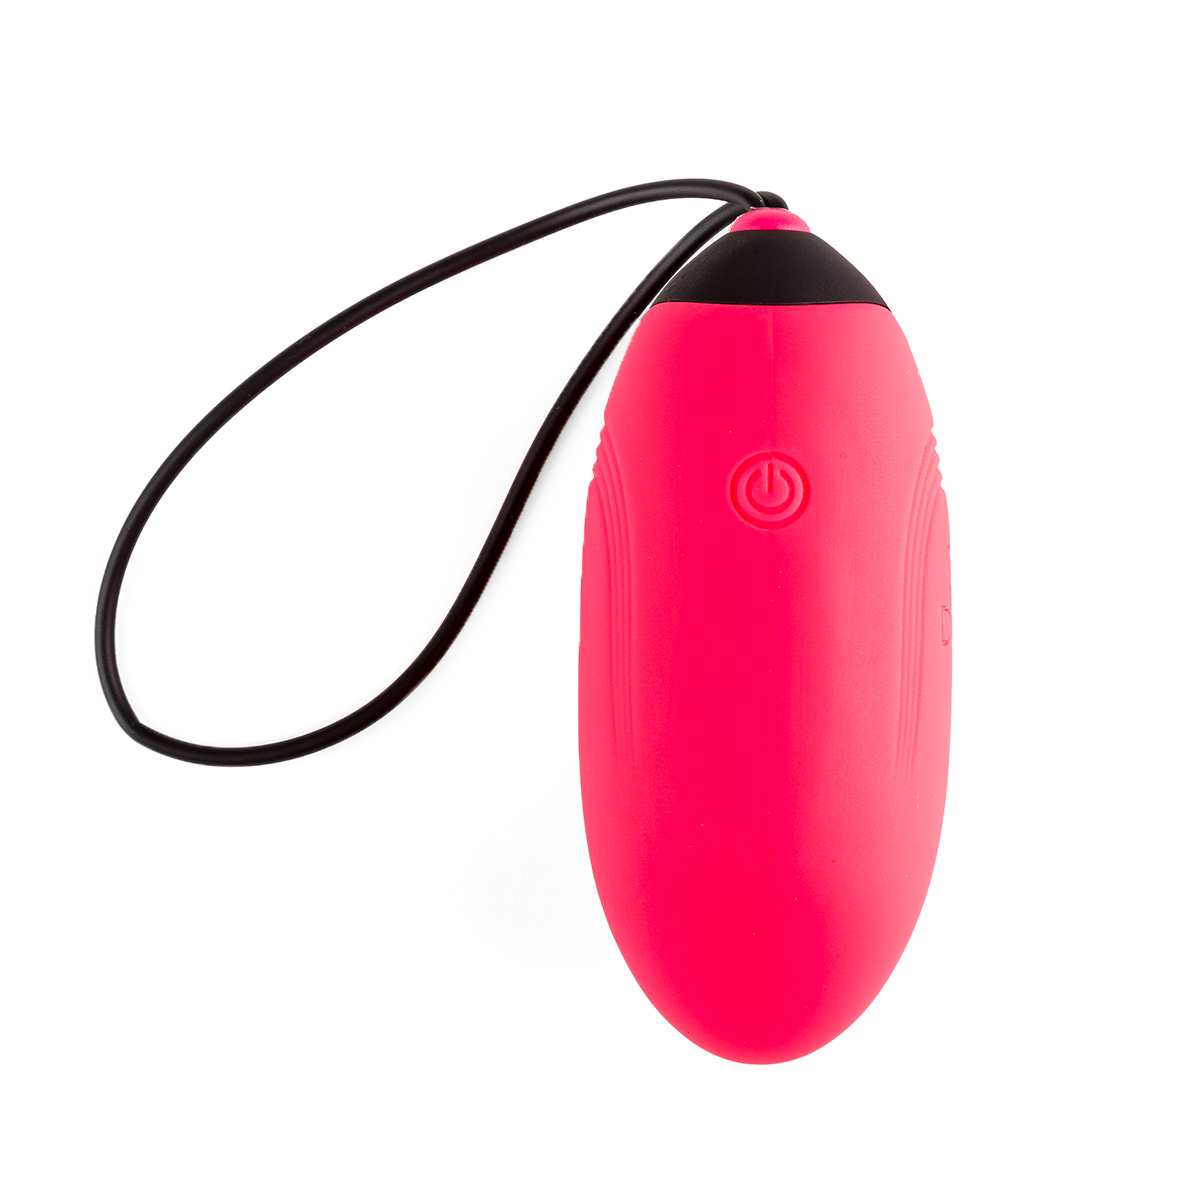 Rechargeable-Remote-Control-Egg-G5-Pink-OPR-3090076-1